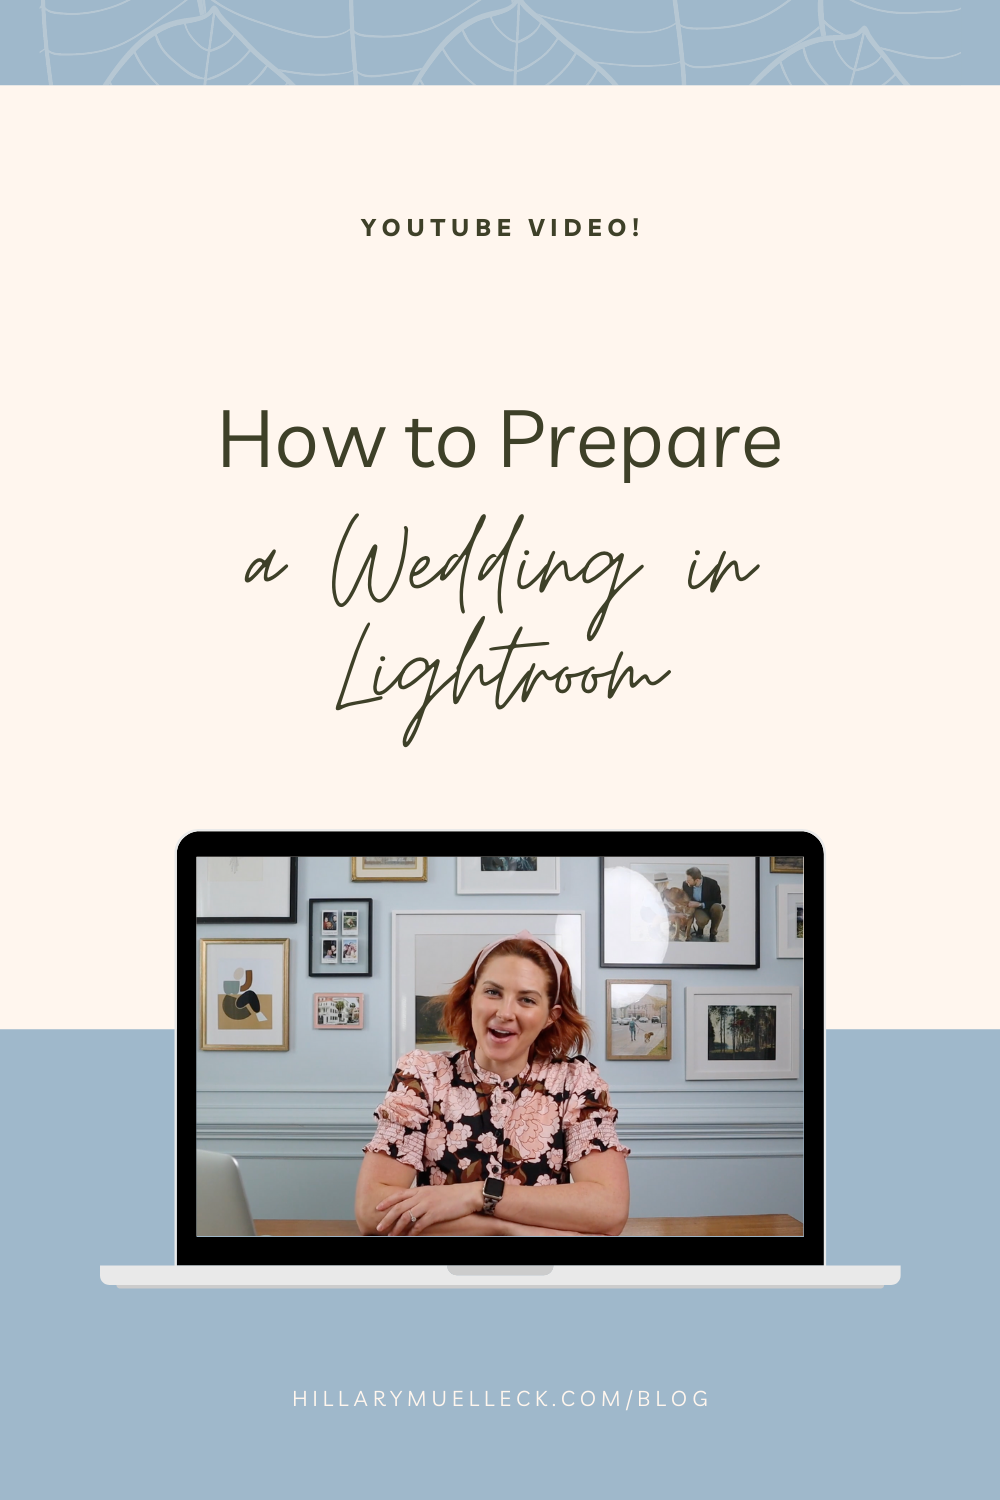 How to Prepare a Wedding in Lightroom Before Editing: tips for wedding photographers from Hillary Muelleck